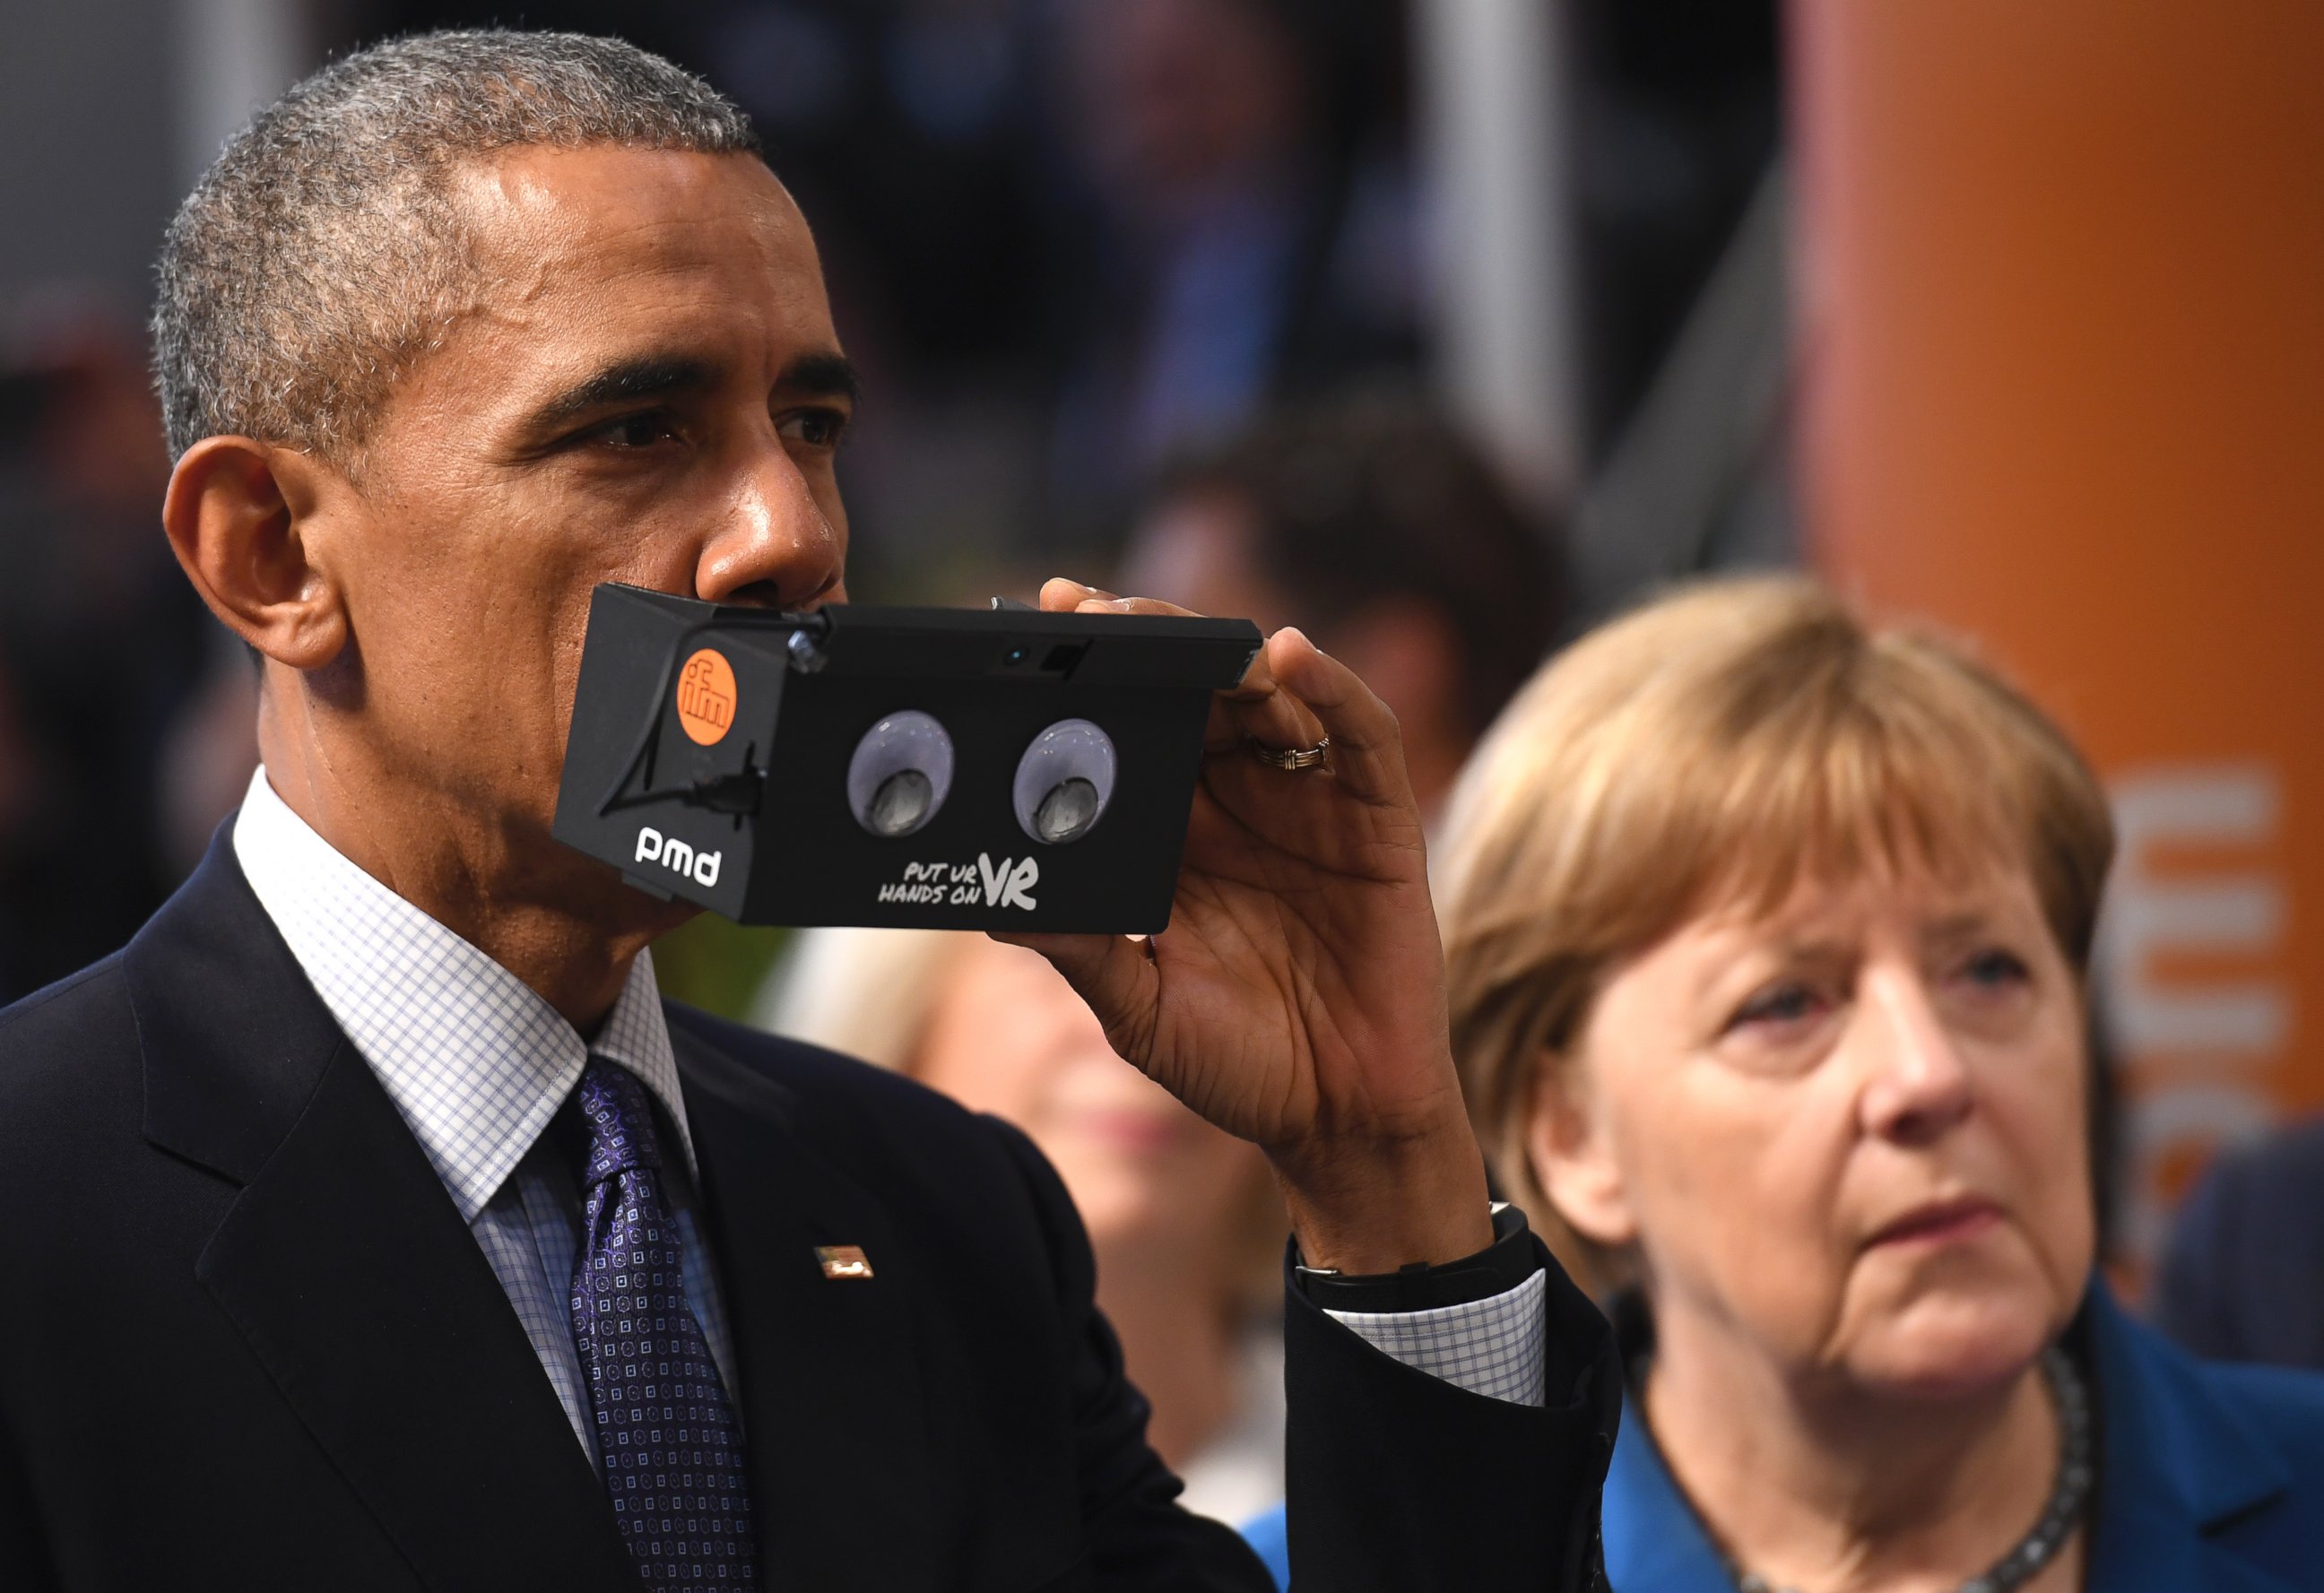 PHOTO:President Barack Obama and German Chancellor Angela Merkel visit the ifm electronics stand at the Hannover Messe industrial trade fair, April 25, 2016, in Hanover, Germany.   